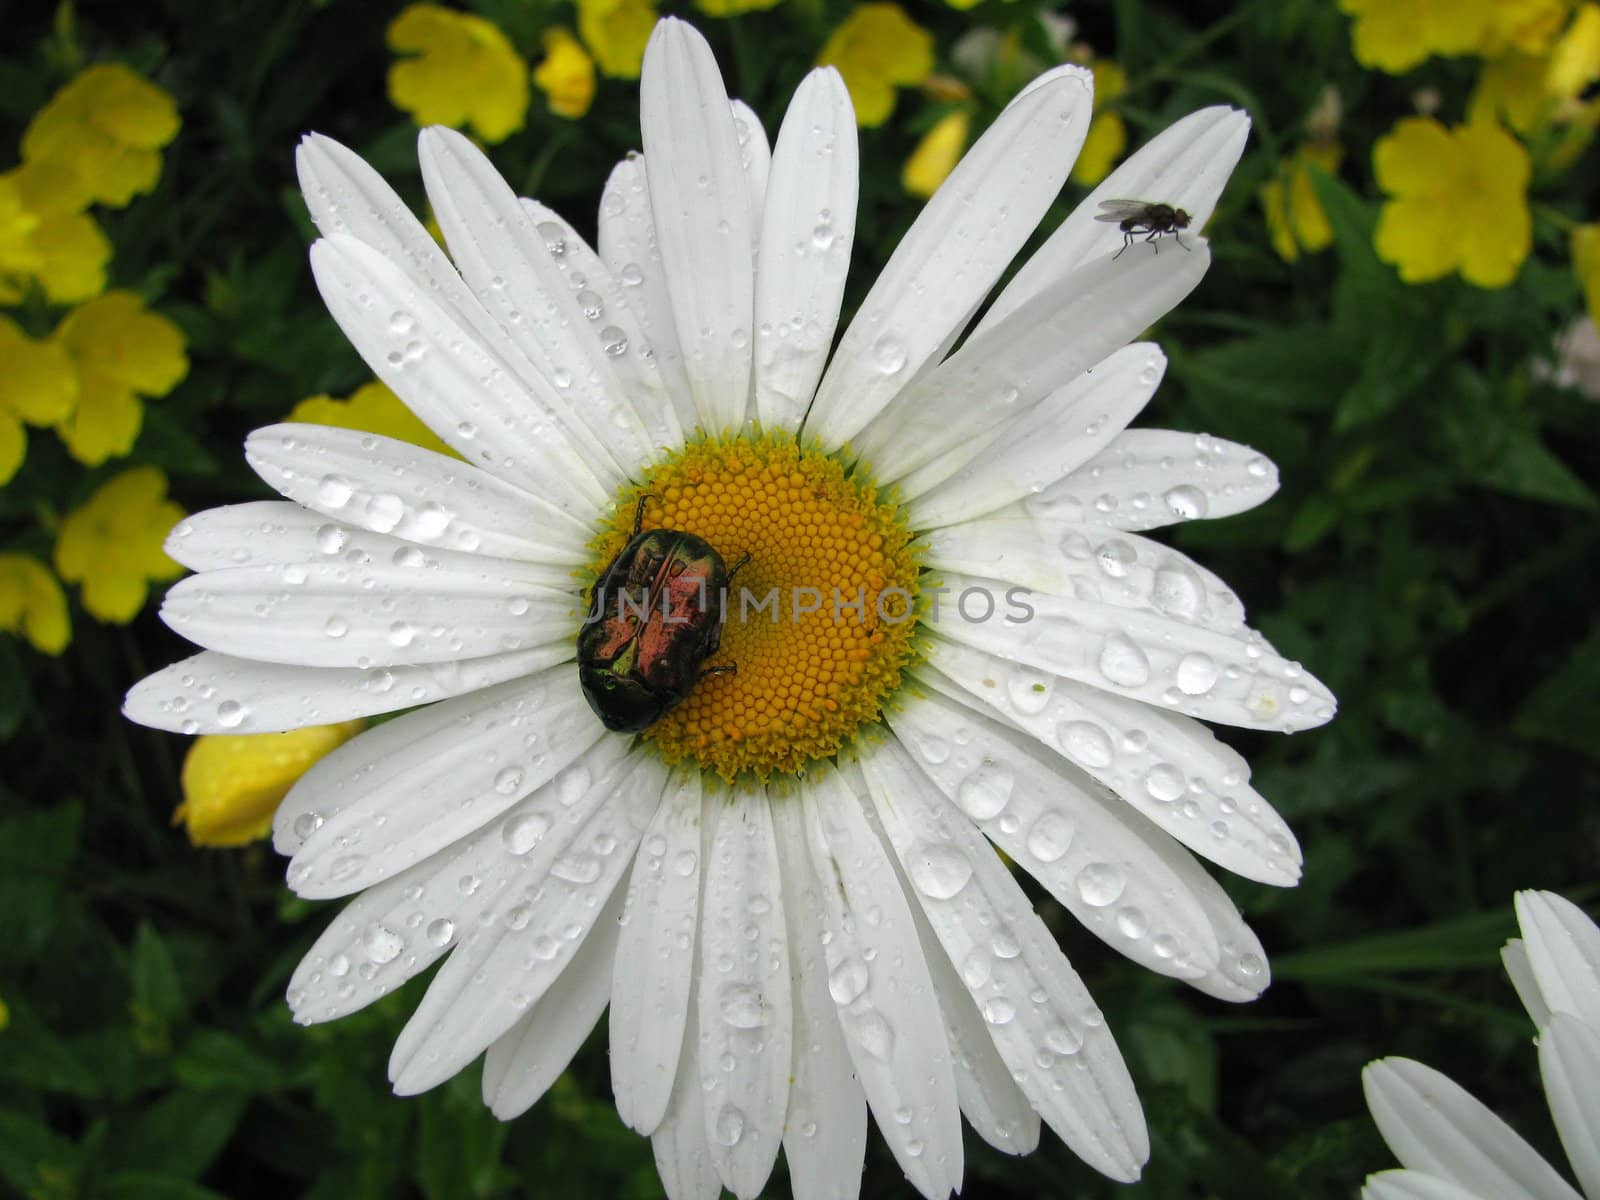 Daisywheel; cockchafer; fly; white flower; background; dew; drop; garden; flowerses; beauty; invoice; tenderness; insect; biology